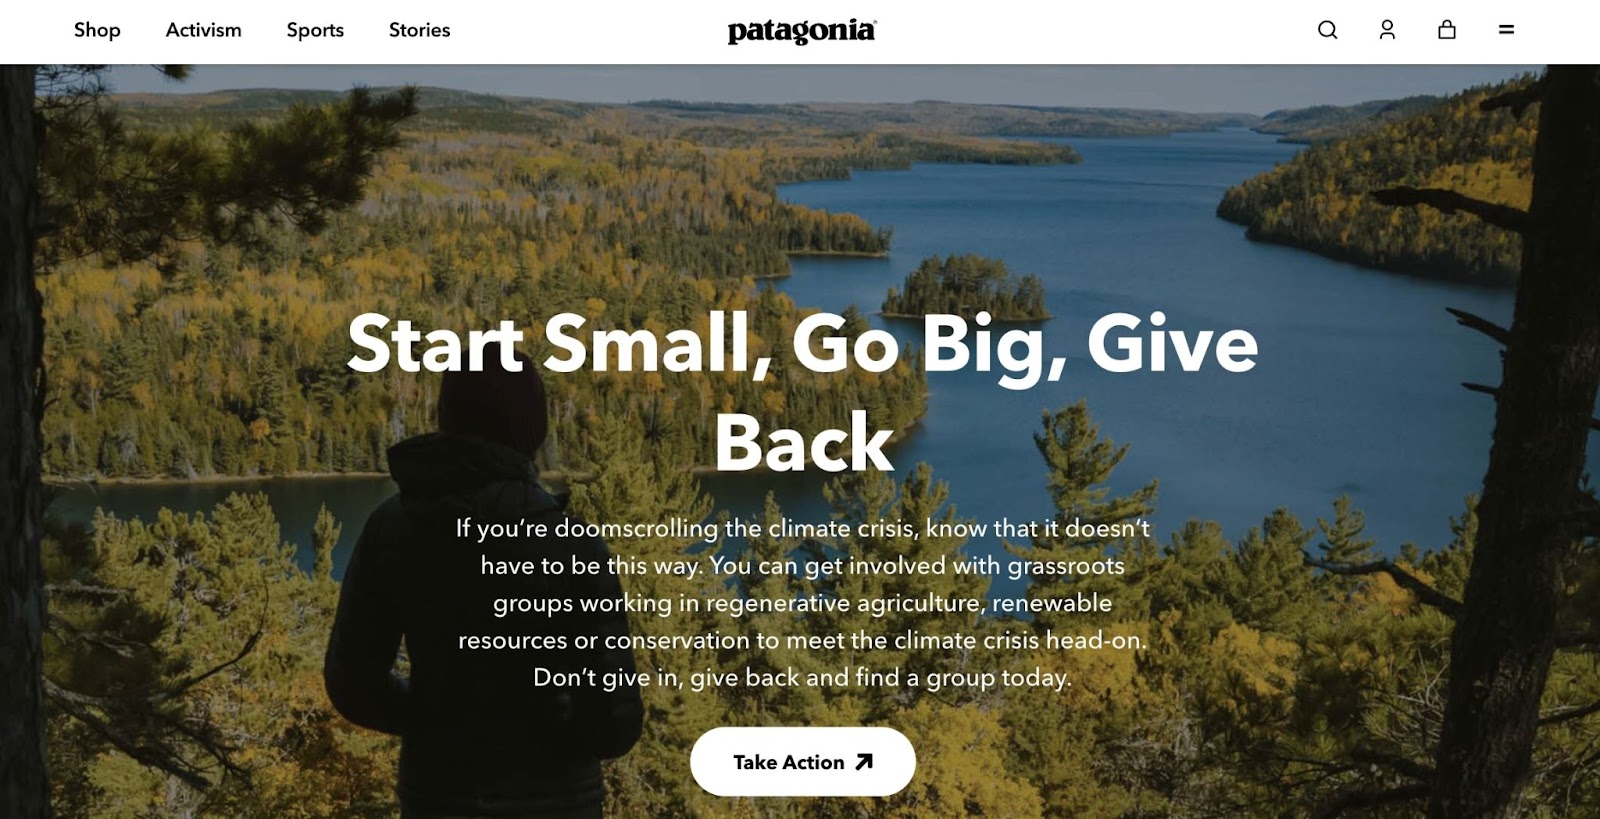 Patagonia call to action (CTA) example